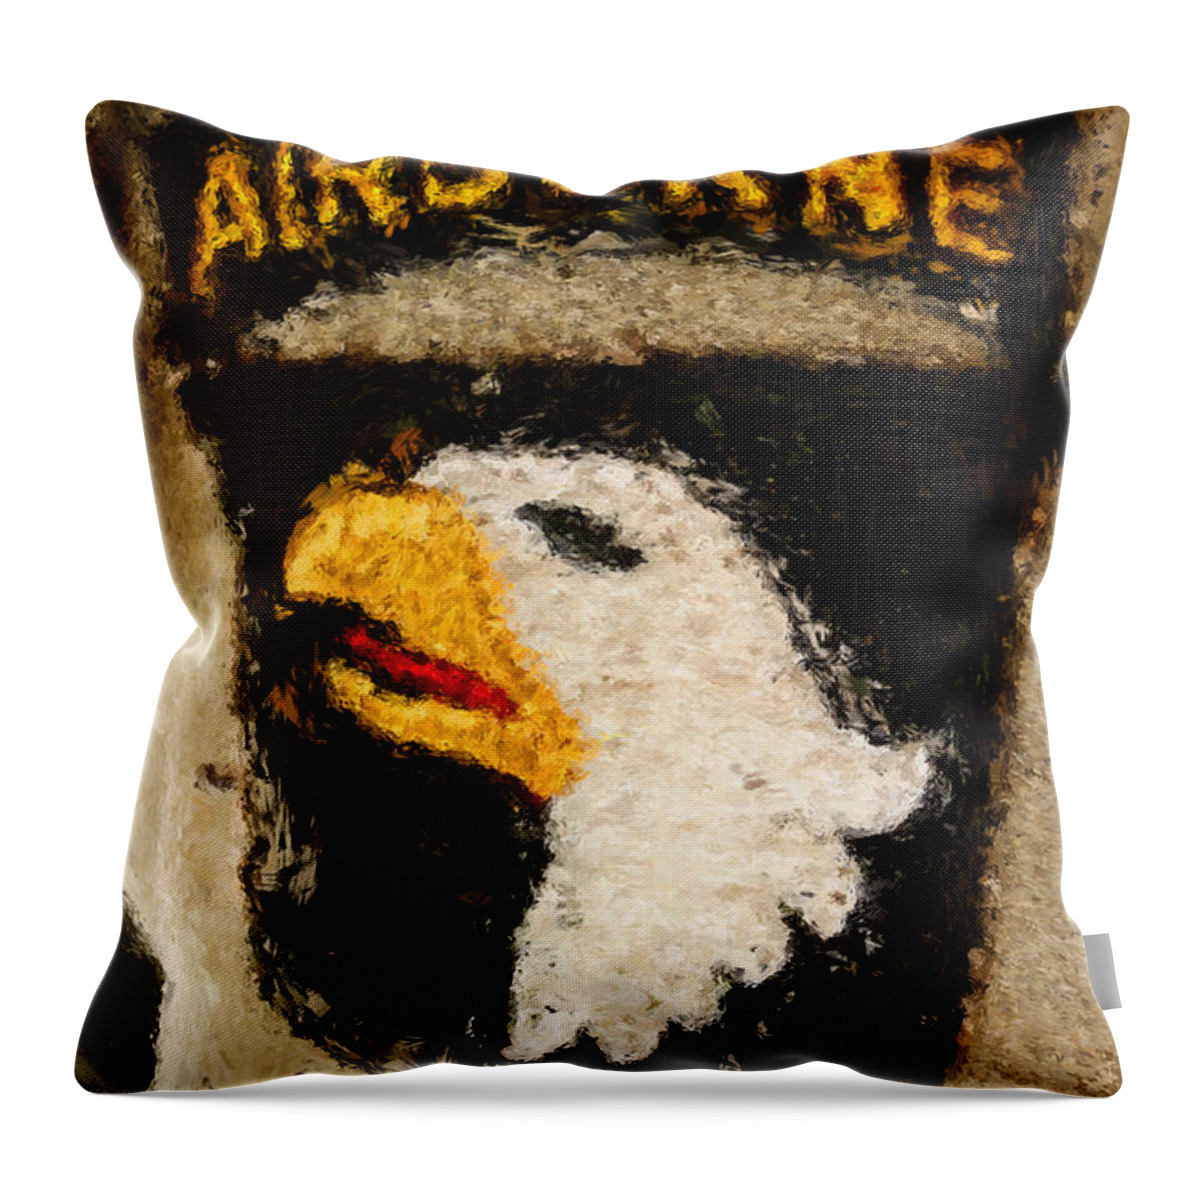 101st Throw Pillow featuring the digital art The 101st Airborne Emblem painting by Weston Westmoreland